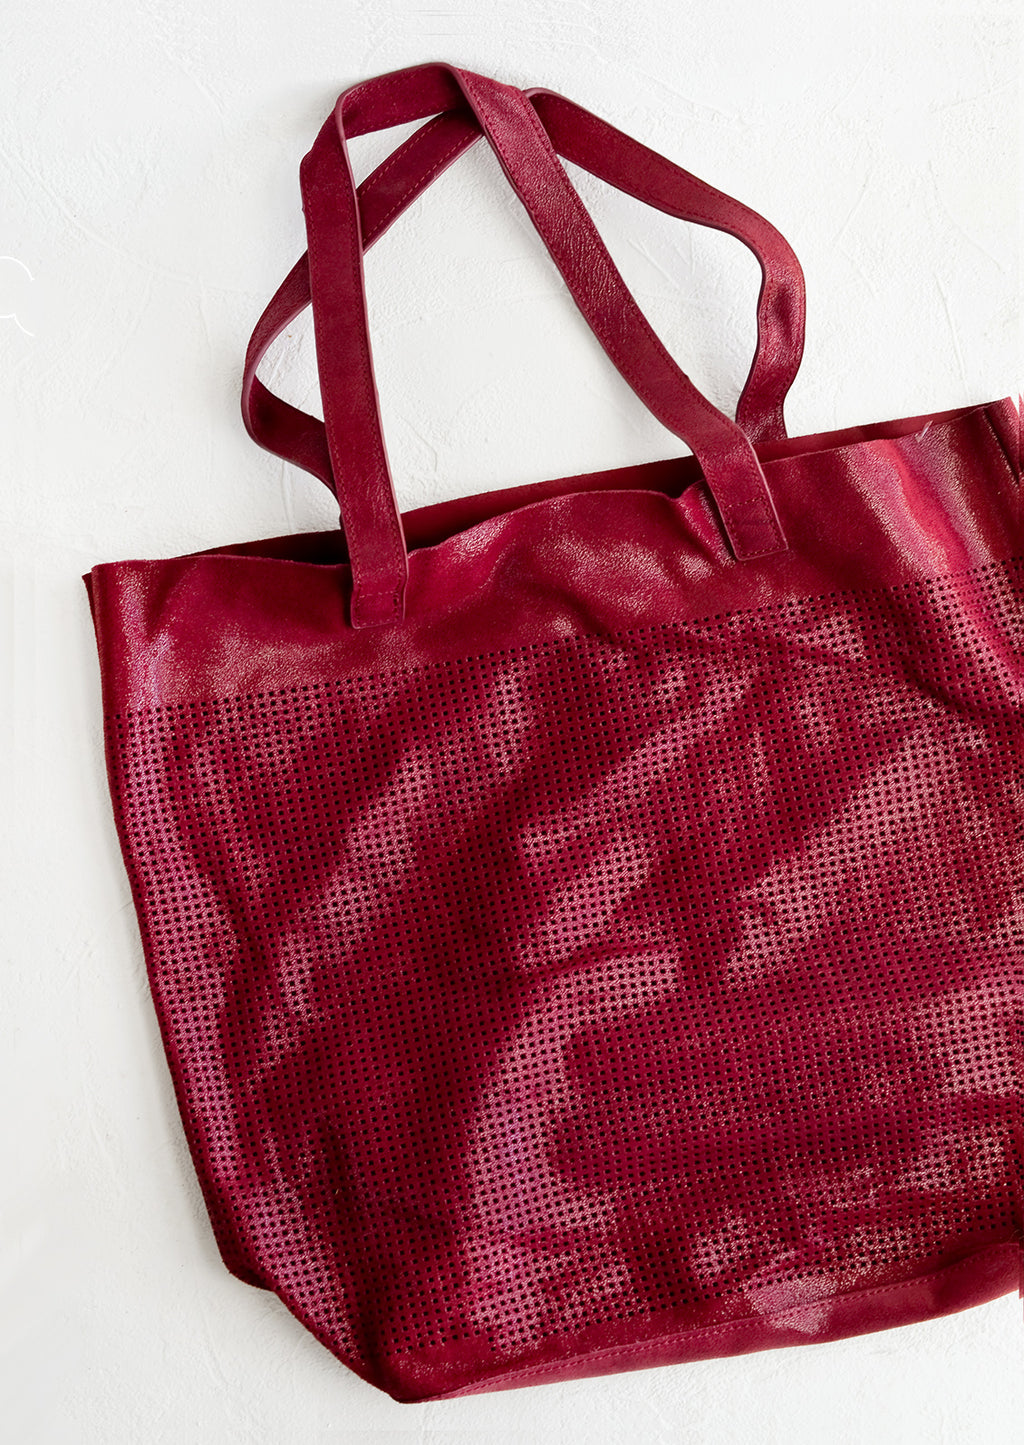 Cranberry: A tote bag made from cranberry colored shimmer leather with square perforation detailing throughout.